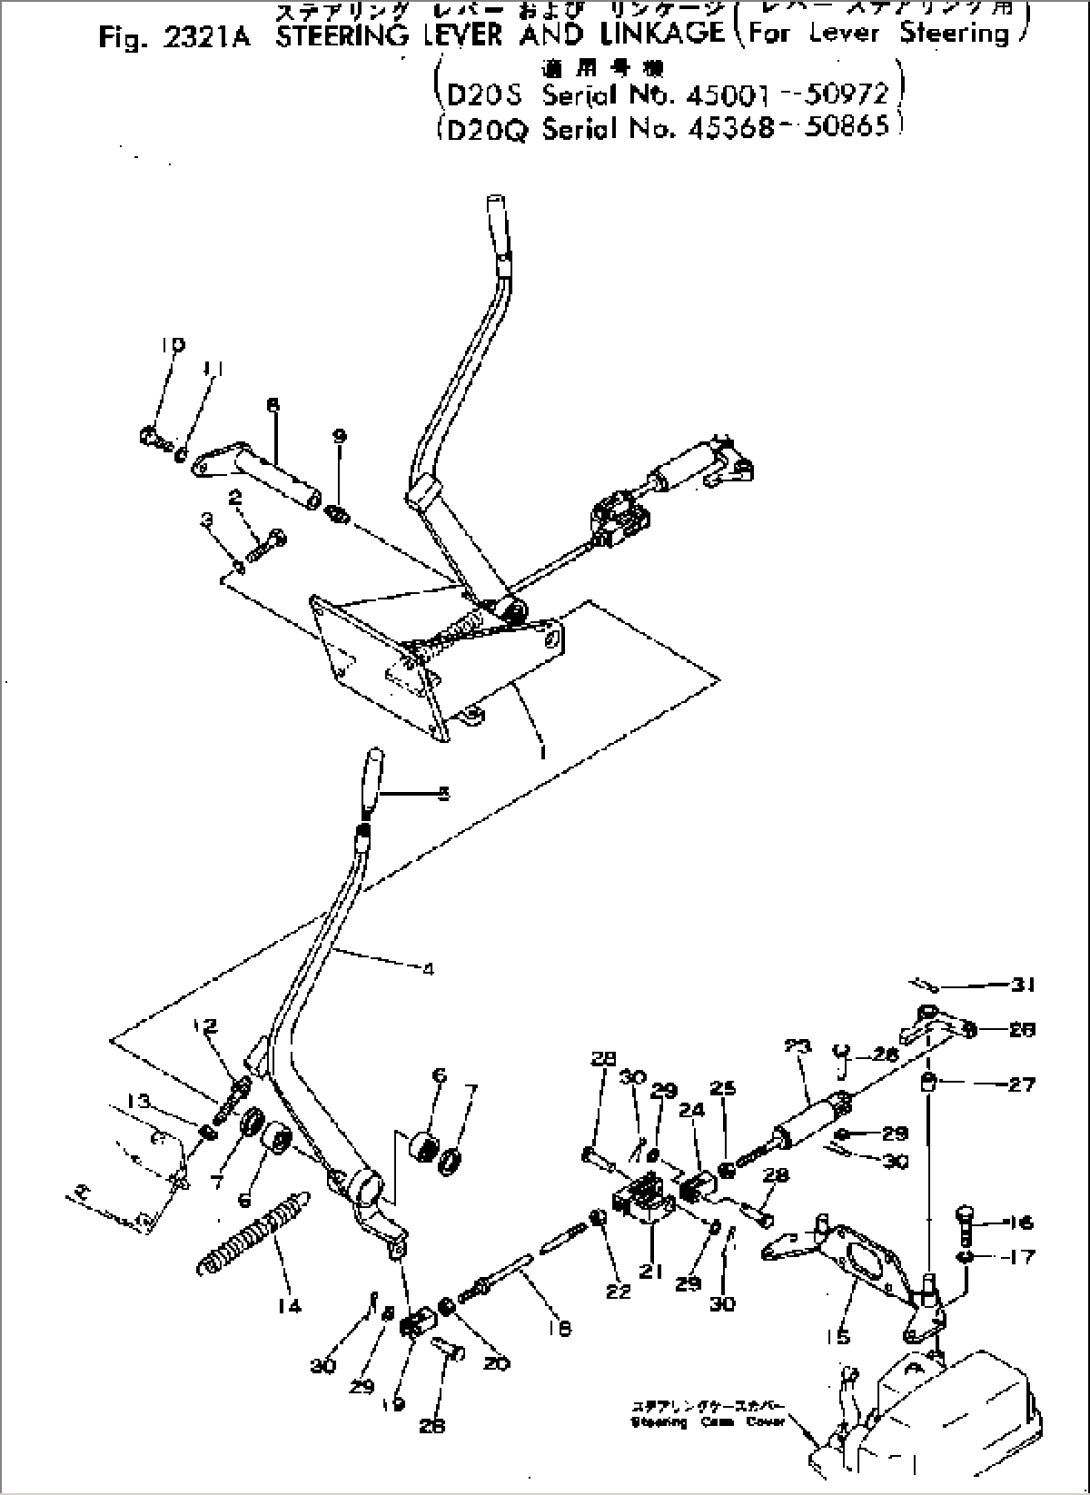 STEERING LEVER AND LINKAGE (FOR LEVER STEERING)(#50001-50972)